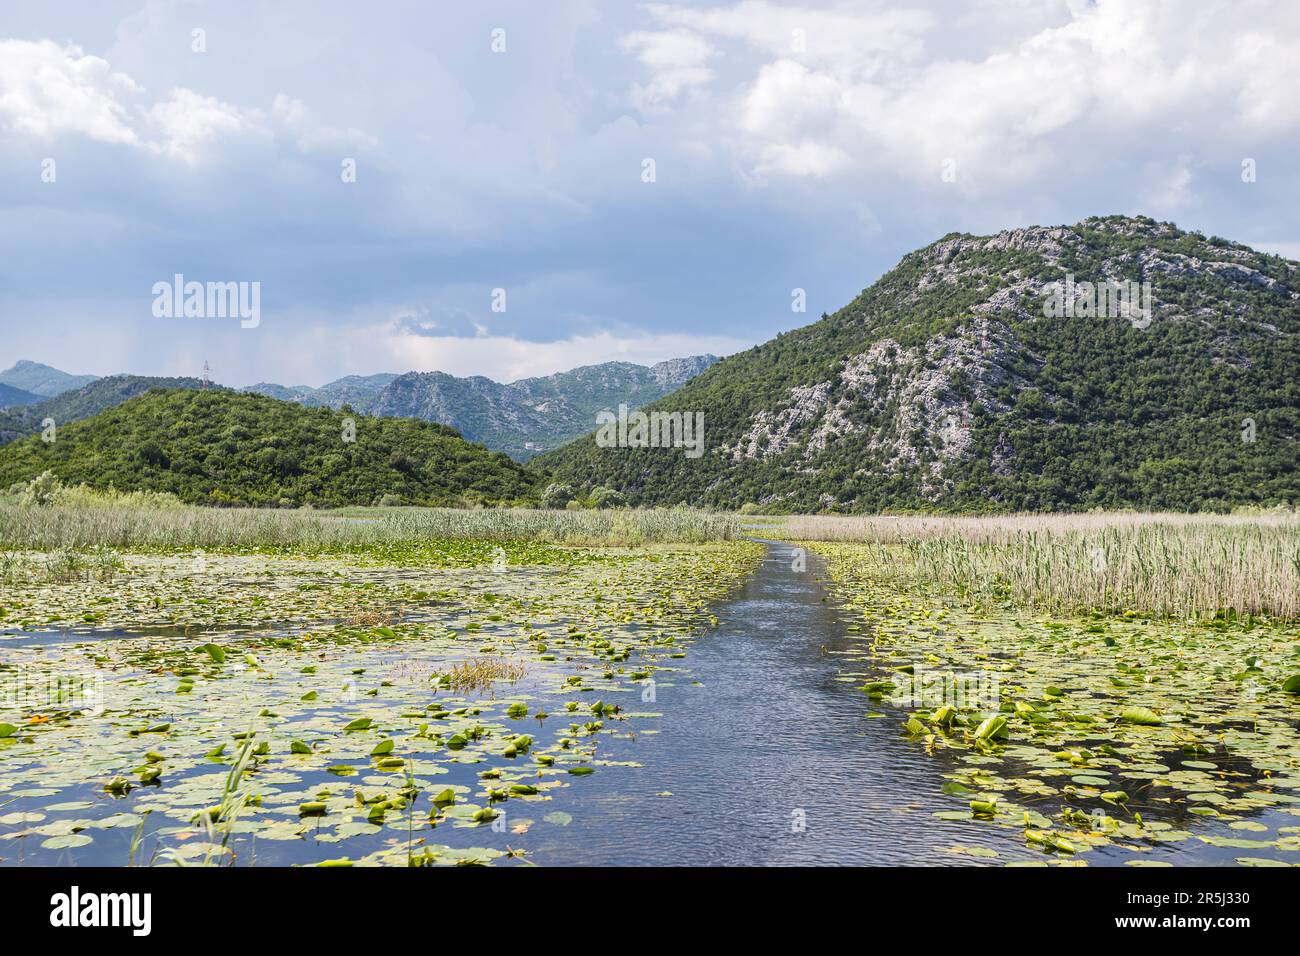 A channel seen between the thousands of water lillies approaching Lake Skadar in Montenegro. Stock Photo